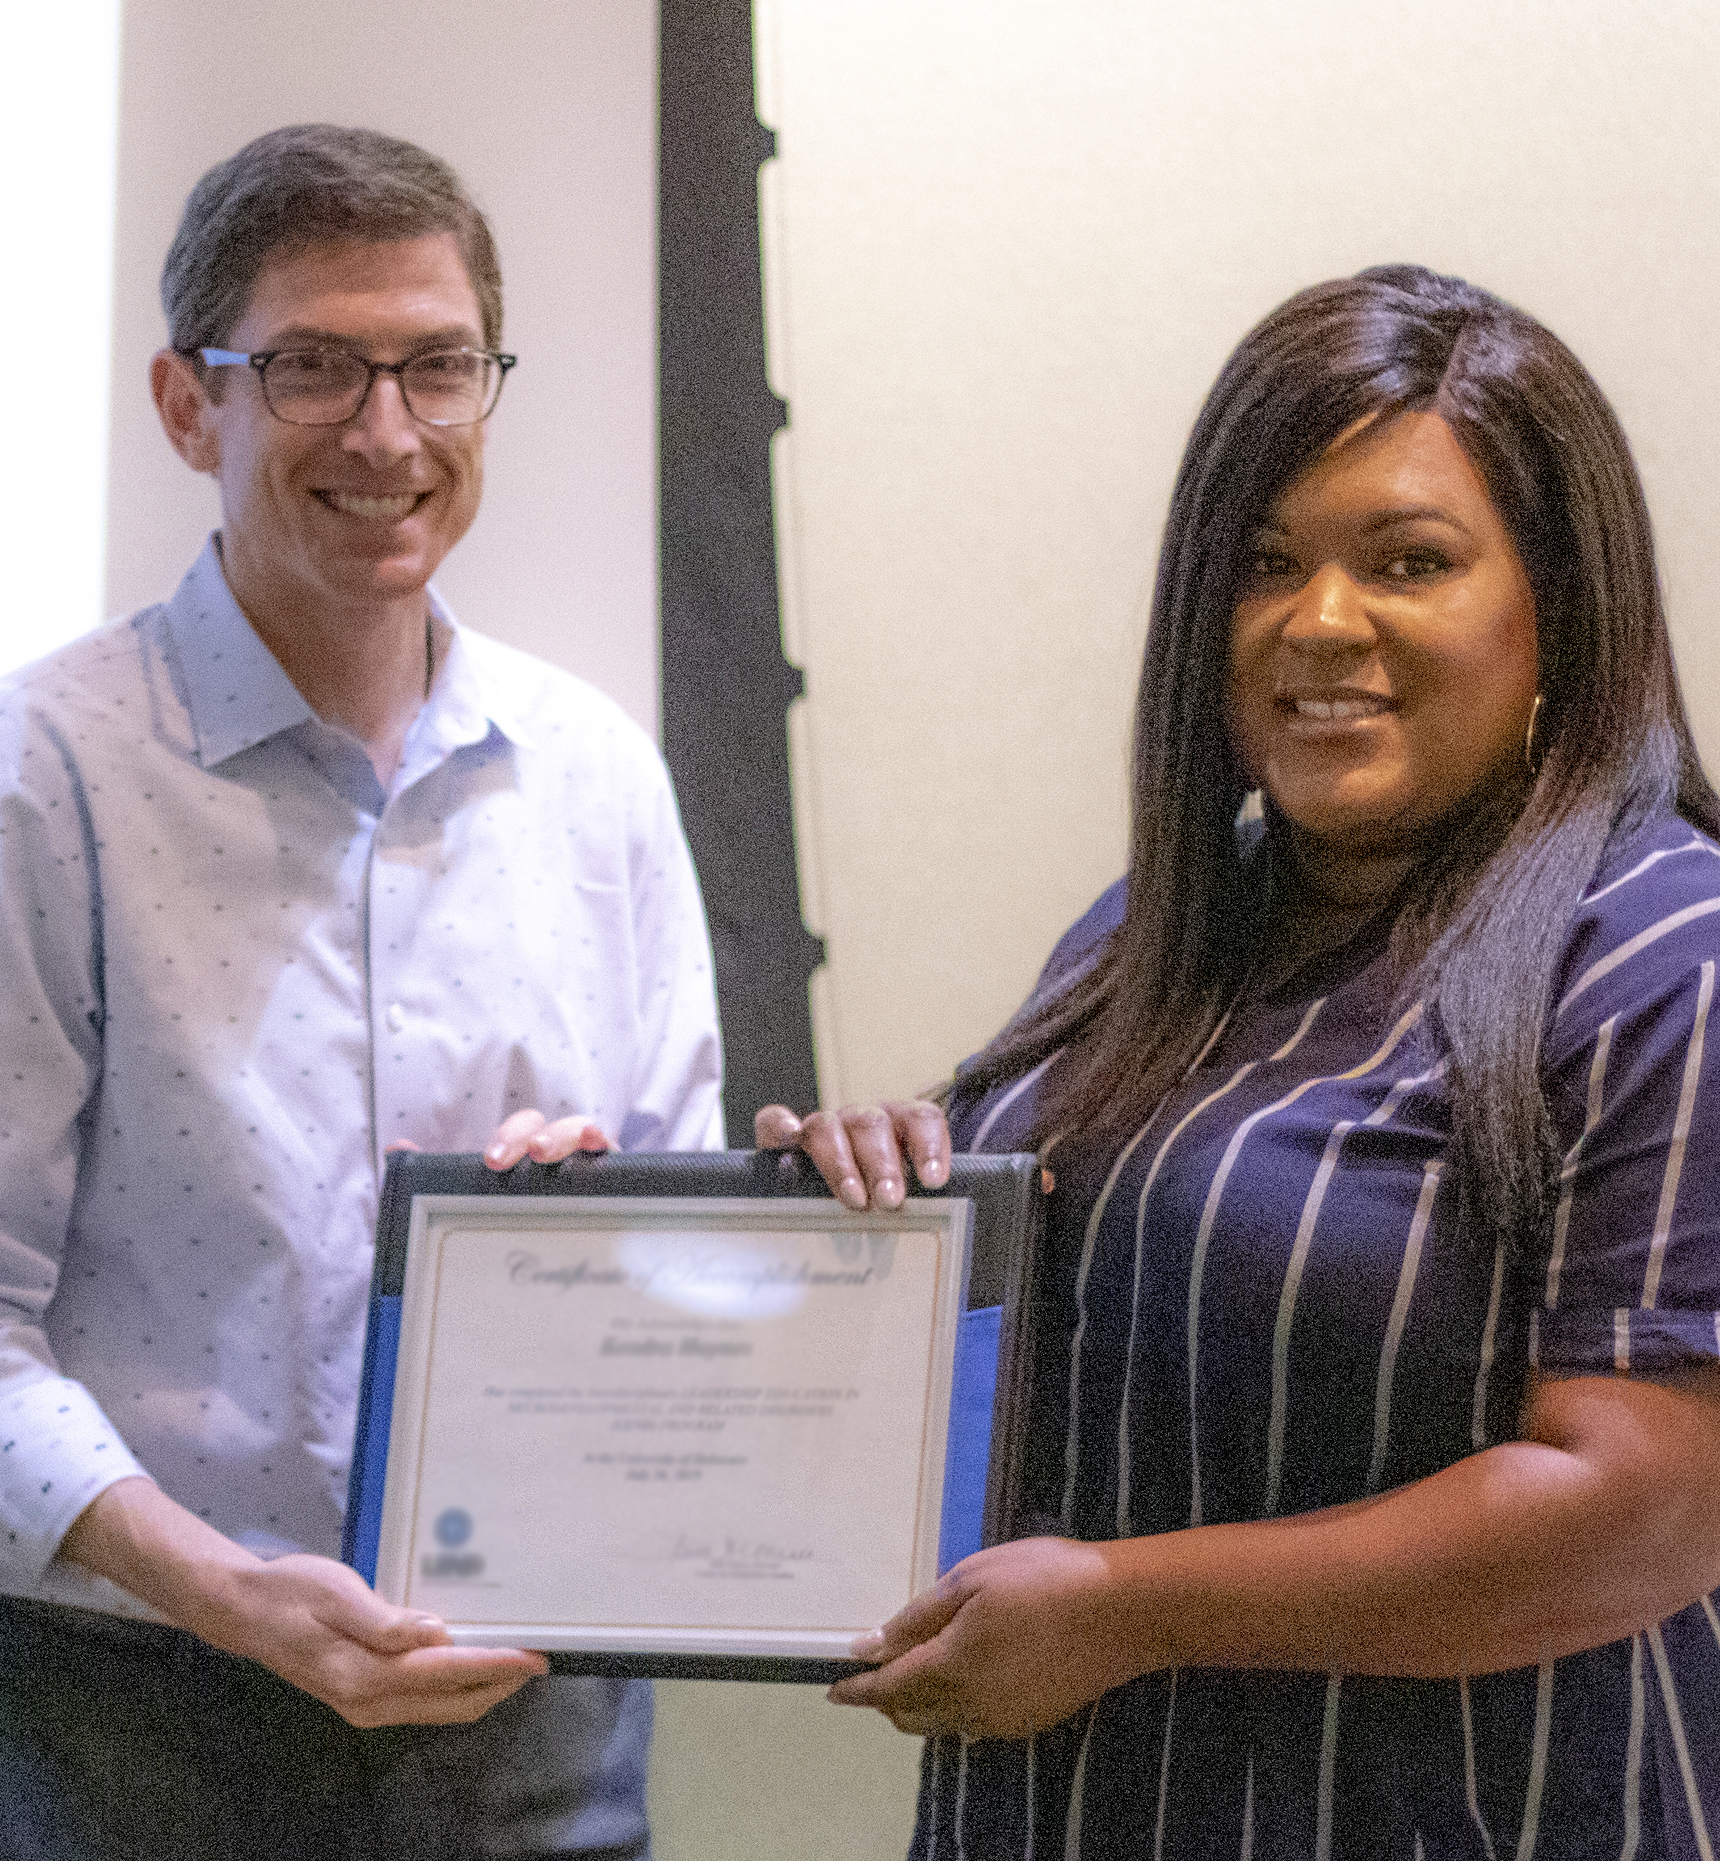 A man in a button down shirt and slacks holds a certificate with a young woman of color.